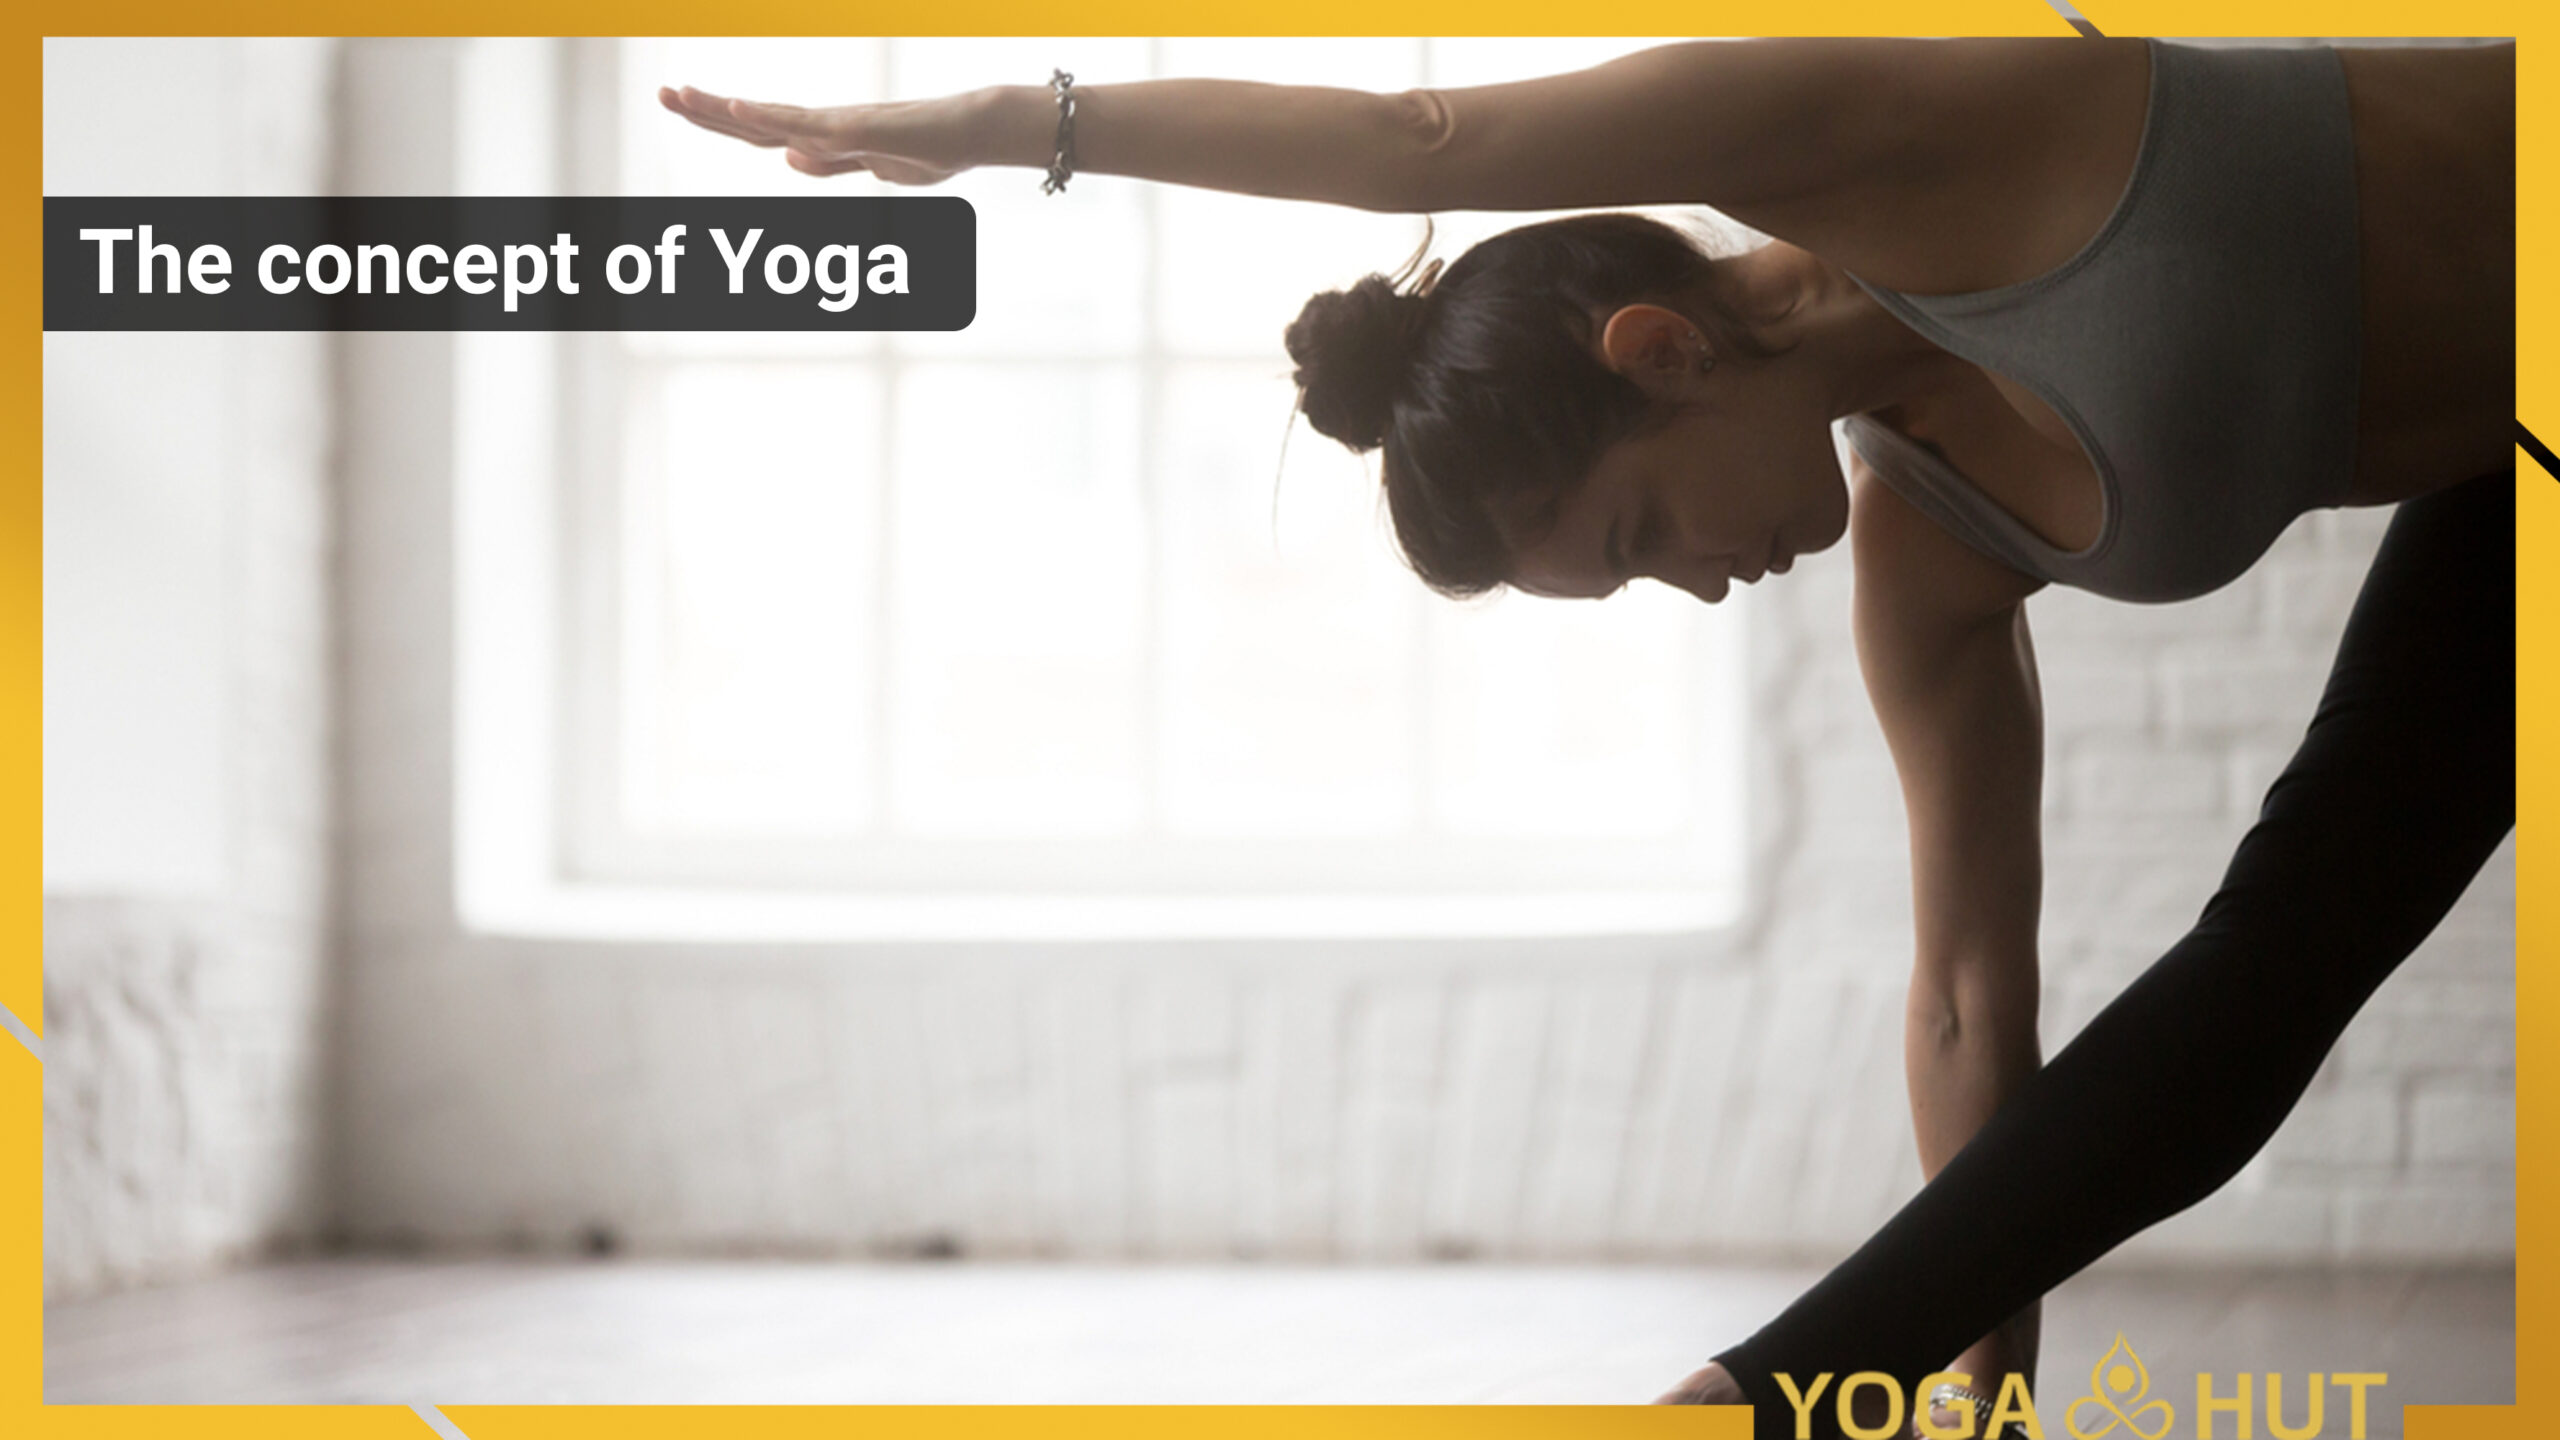 The concept of Yoga